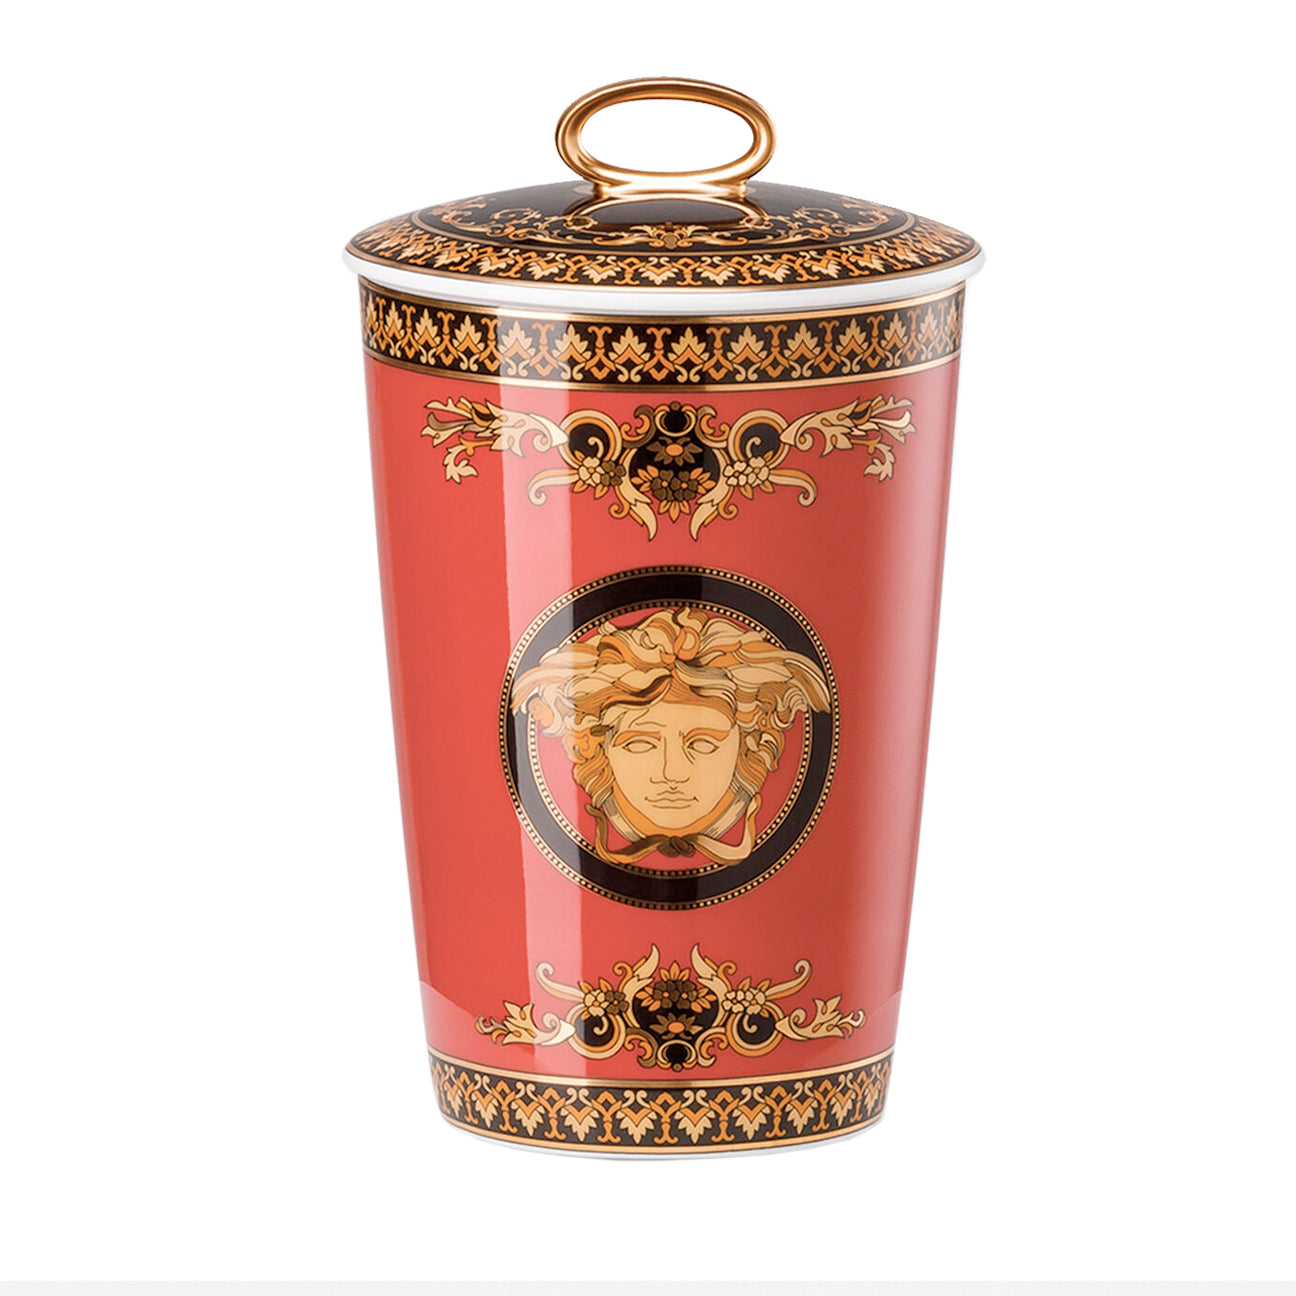 Versace Medusa Scented Candle Pot, Versace - RSVP Style